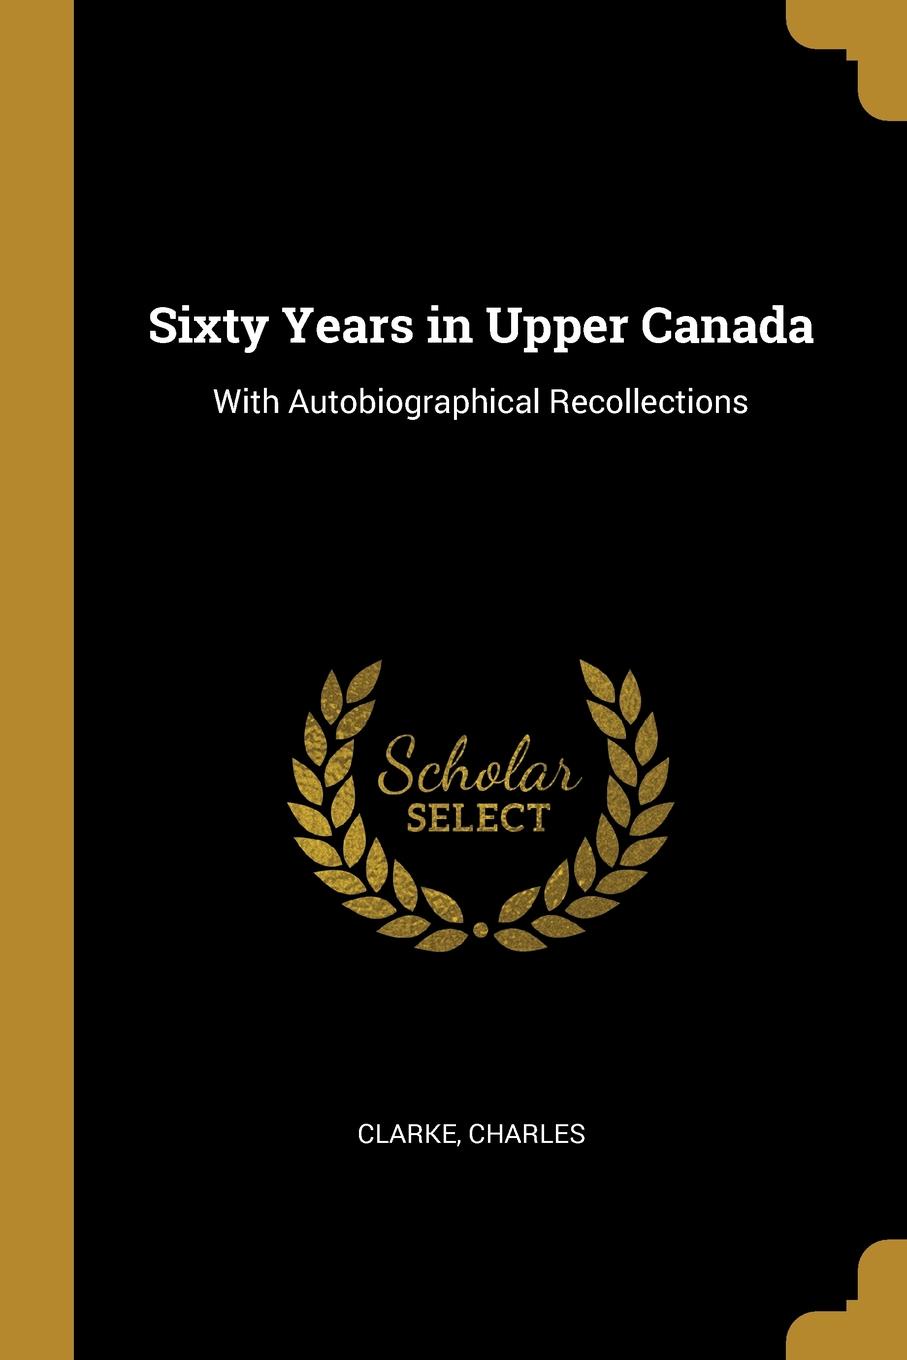 Sixty Years in Upper Canada. With Autobiographical Recollections